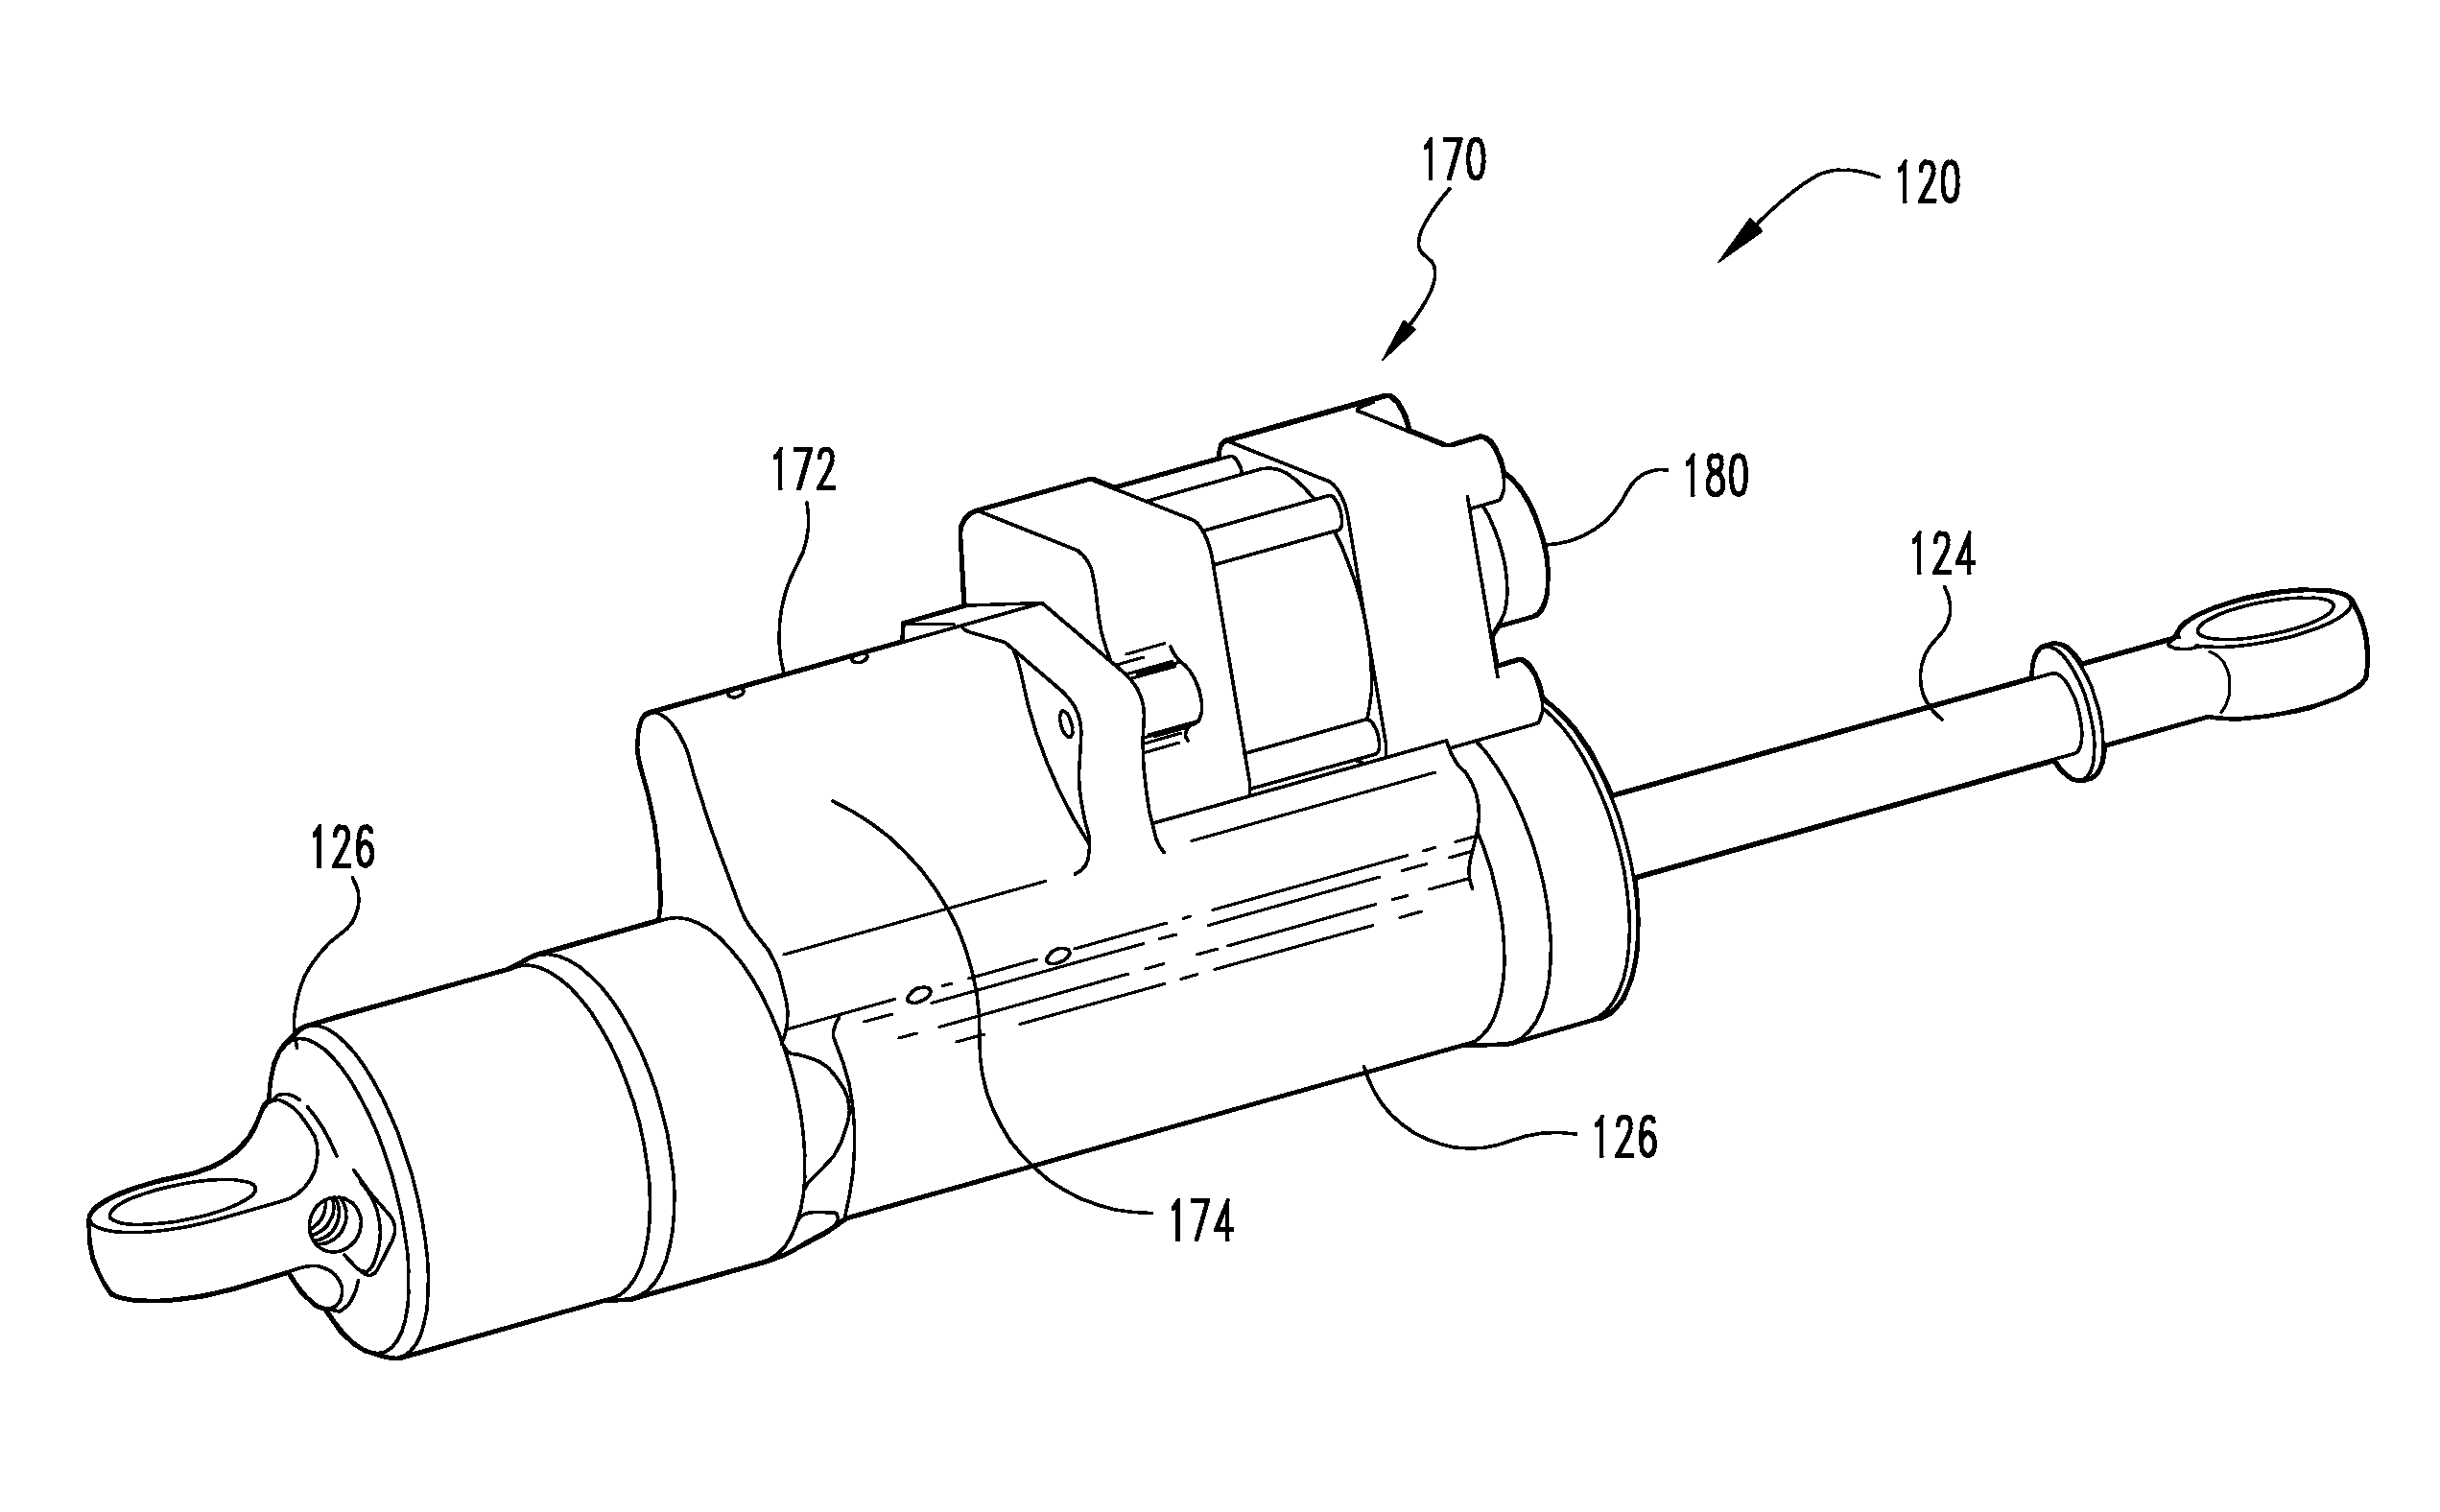 Methods and Apparatus for Developing a Vehicle Suspension